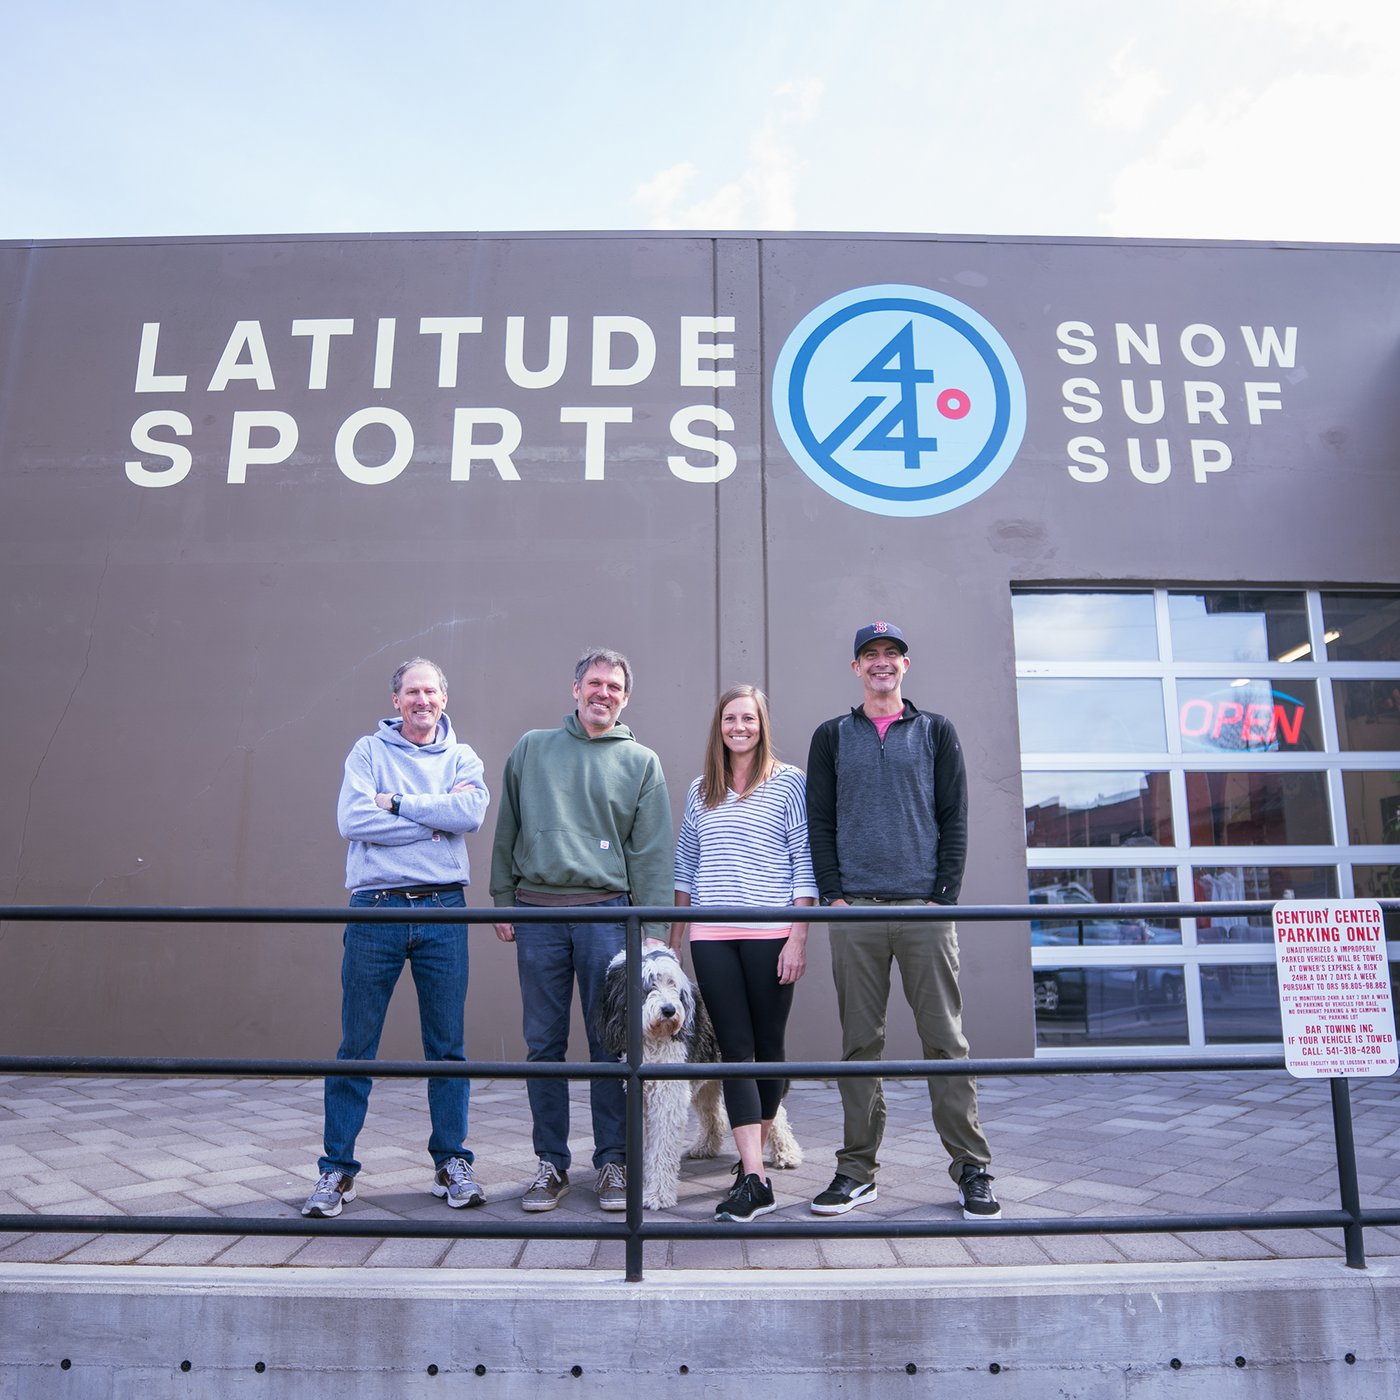 Stand on Liquid and Latitude 44 Sports team photo in front of paddle board and used gear consignment shop